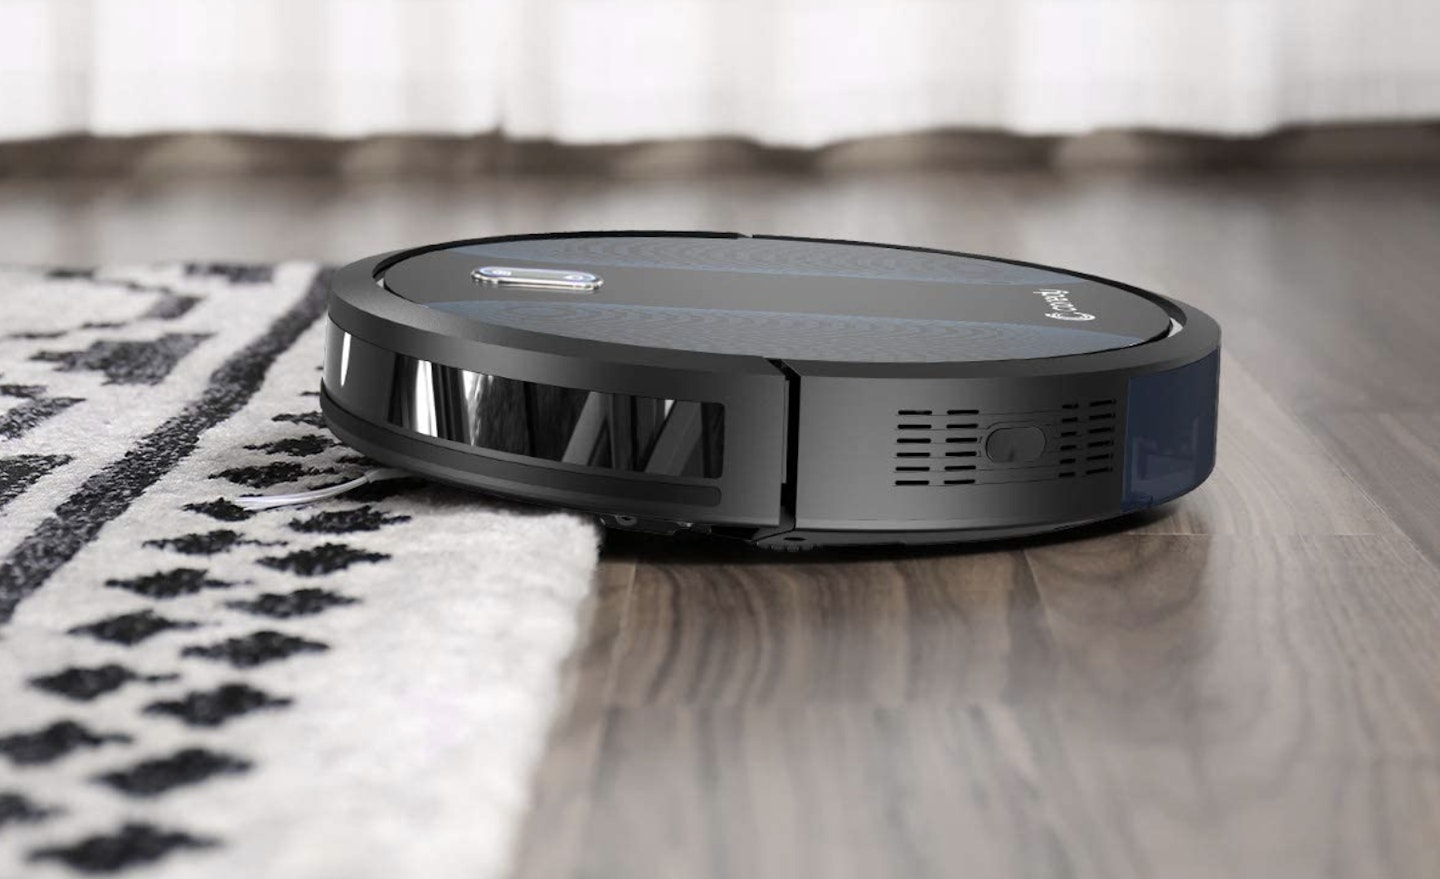 Coredy Robot Vacuum Cleaner Review